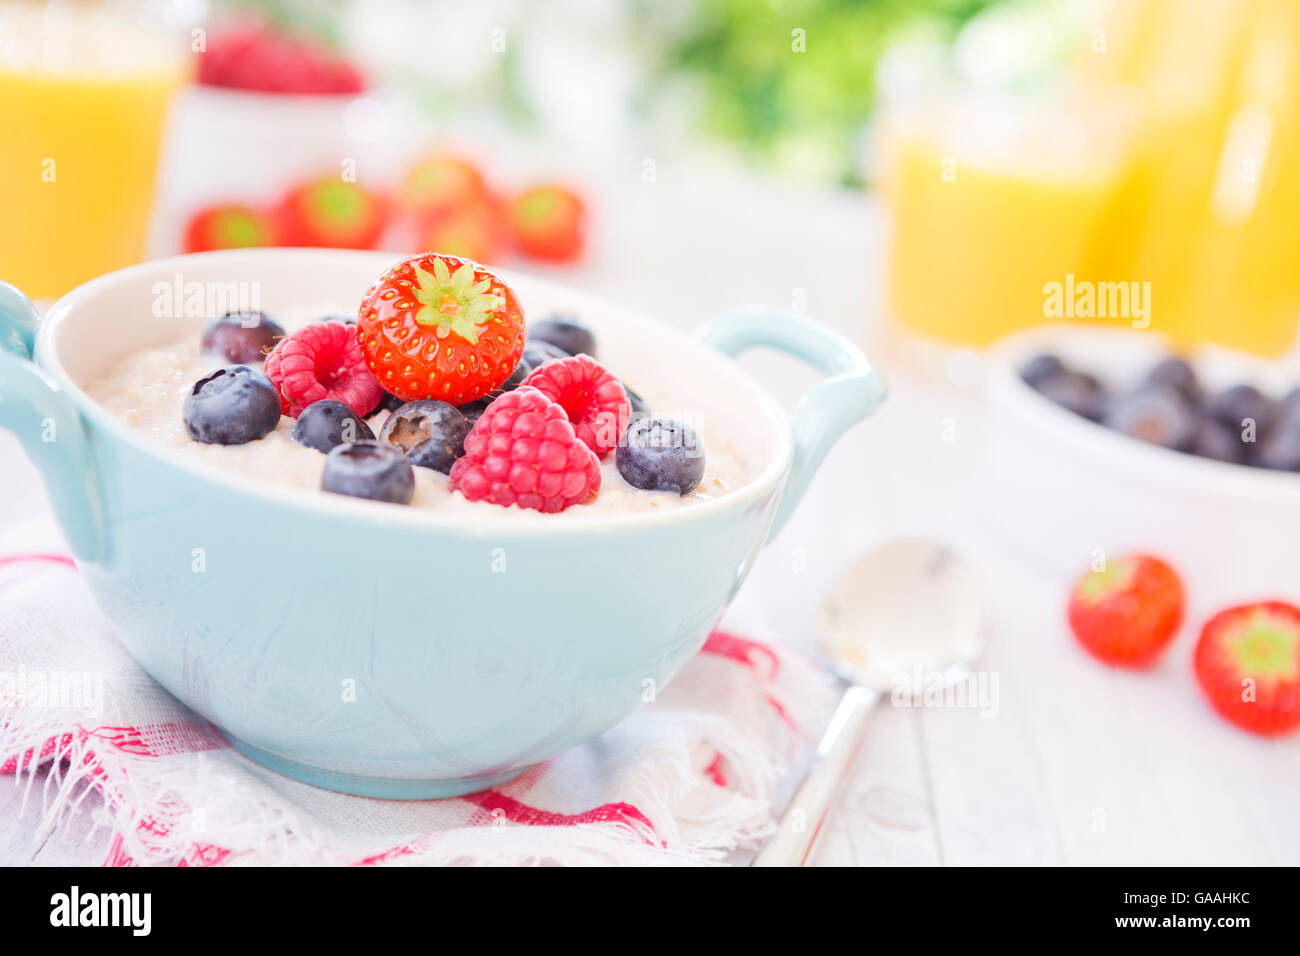 A bowl with homemade oatmeal porridge with fresh fruit on a rustic outdoor table. Stock Photo